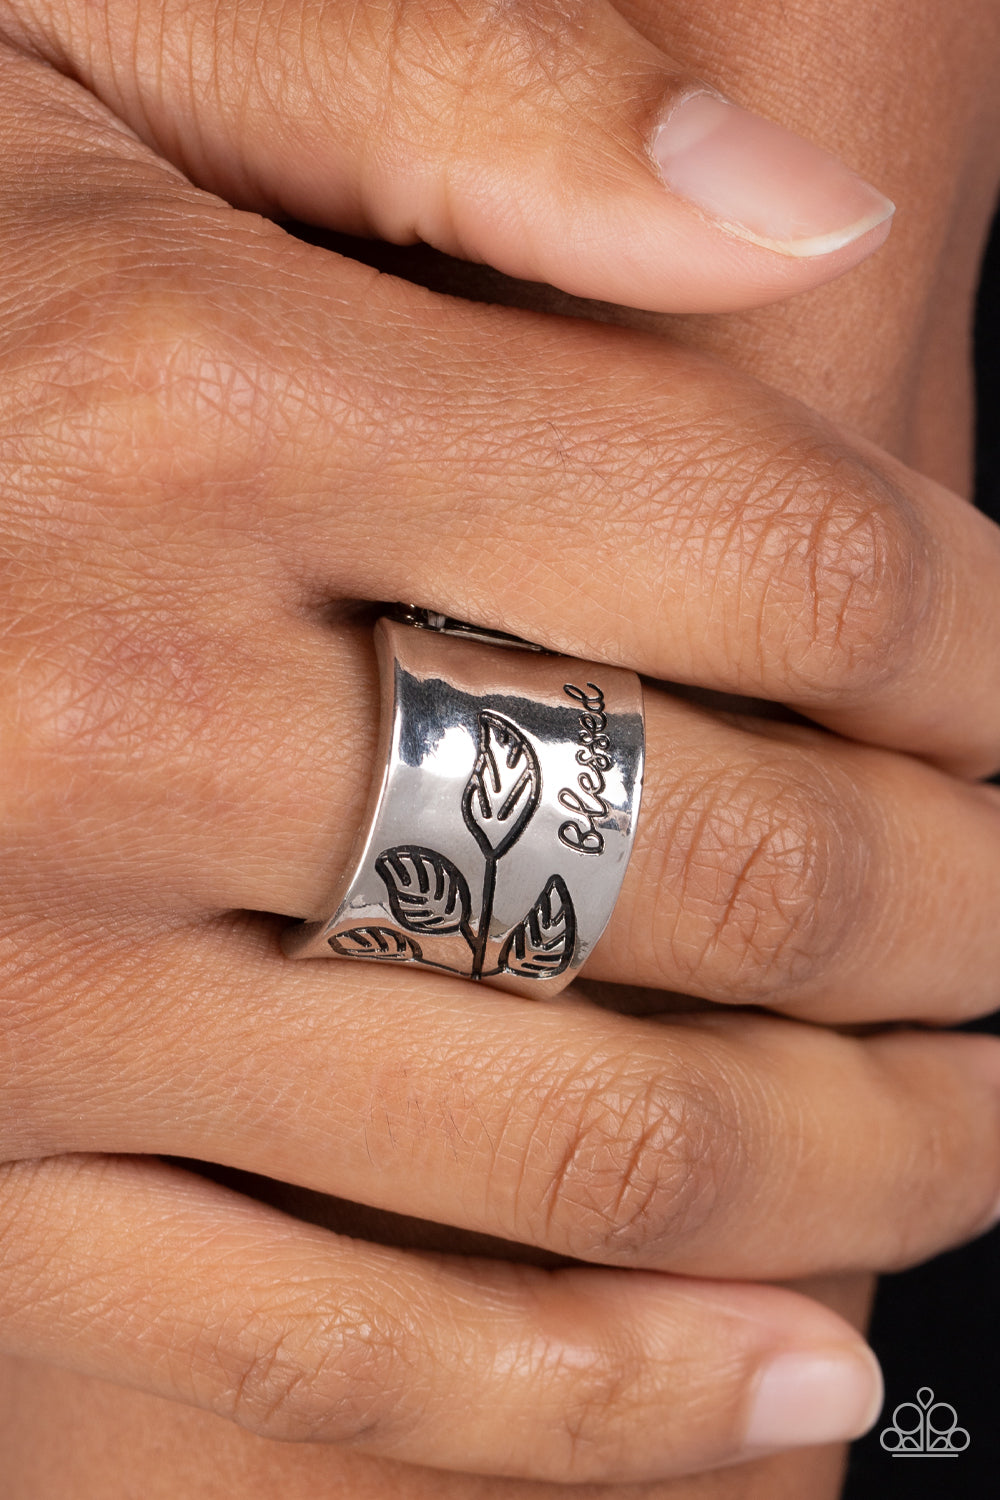 Blessed with Bling - Silver Paparazzi Ring